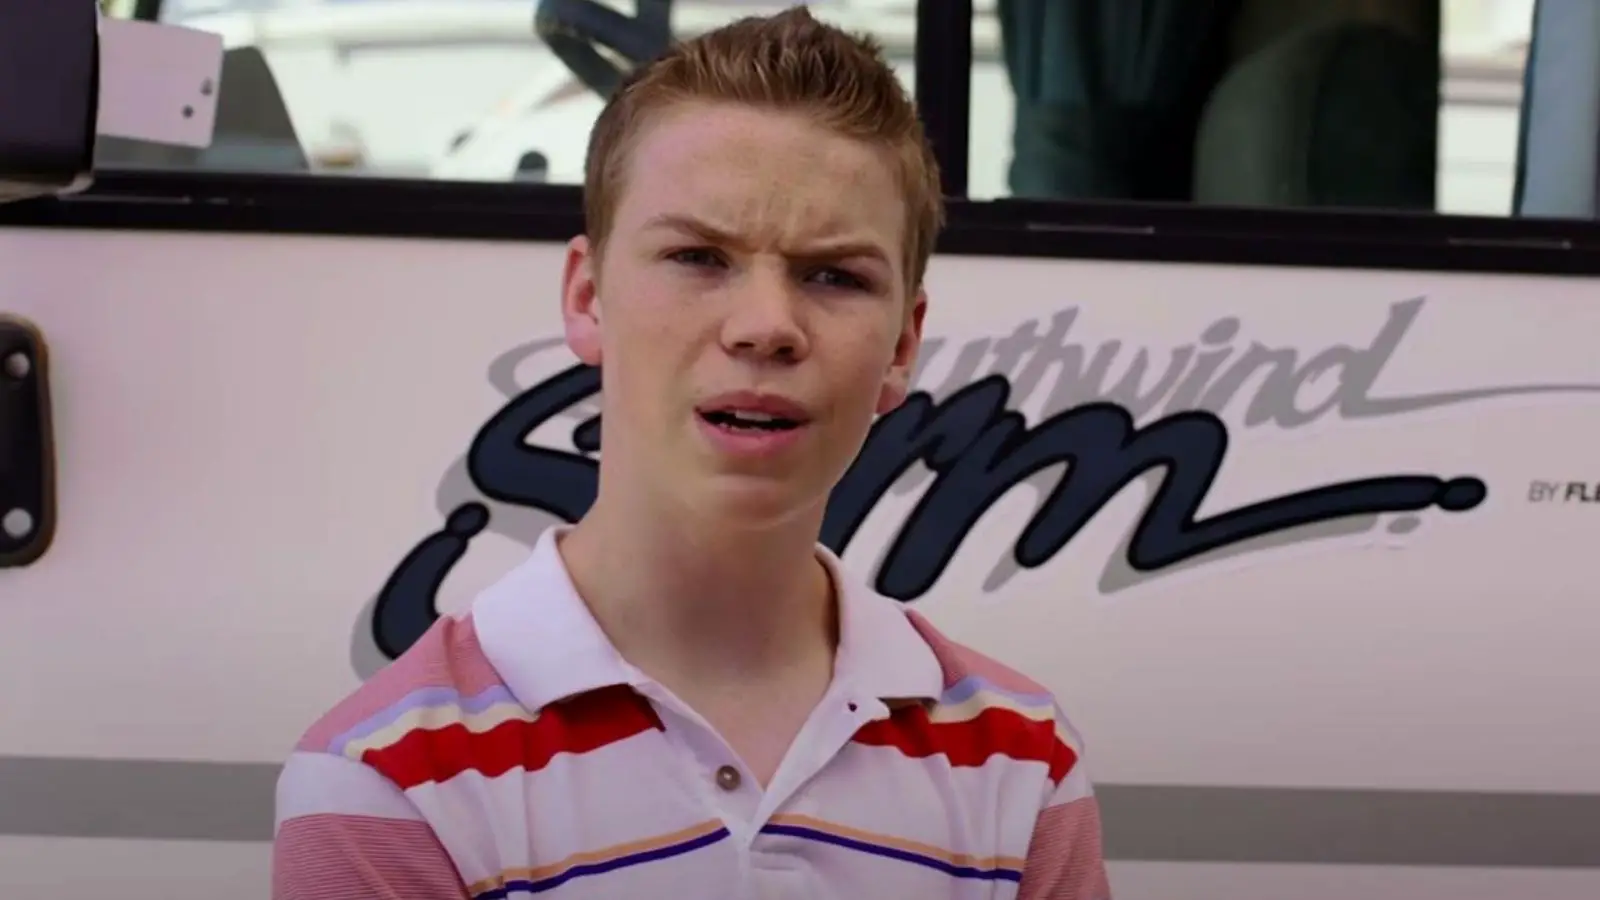 You Guys Are Getting Paid Meme Template on We're the Millers